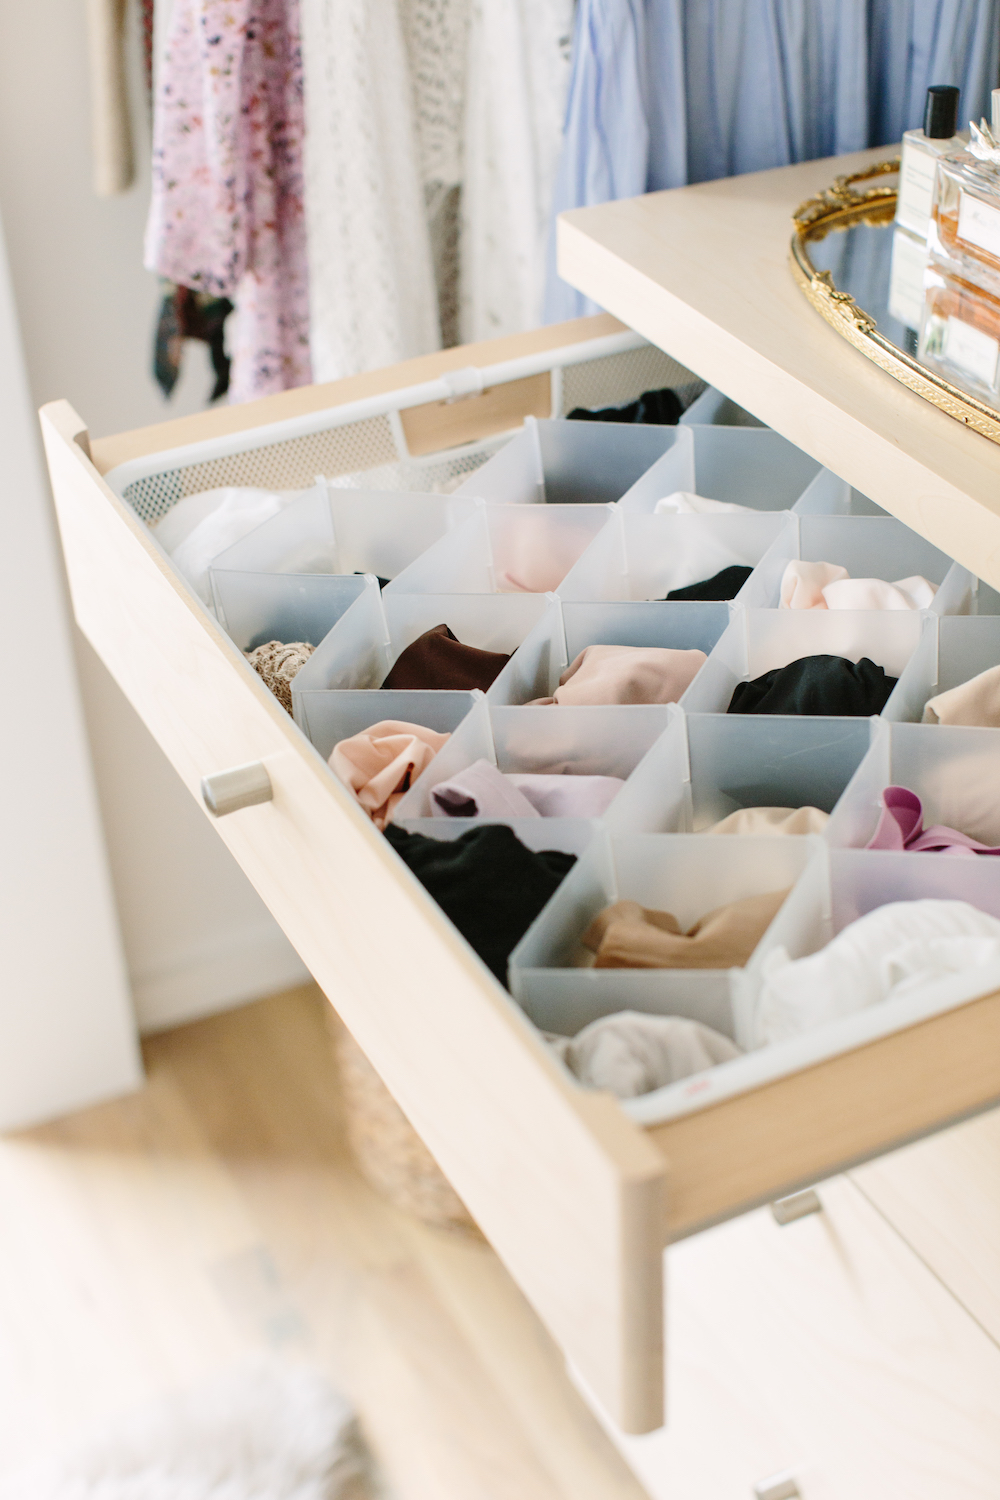 How to Organize Your Bra and Underwear Drawer in 4 Steps